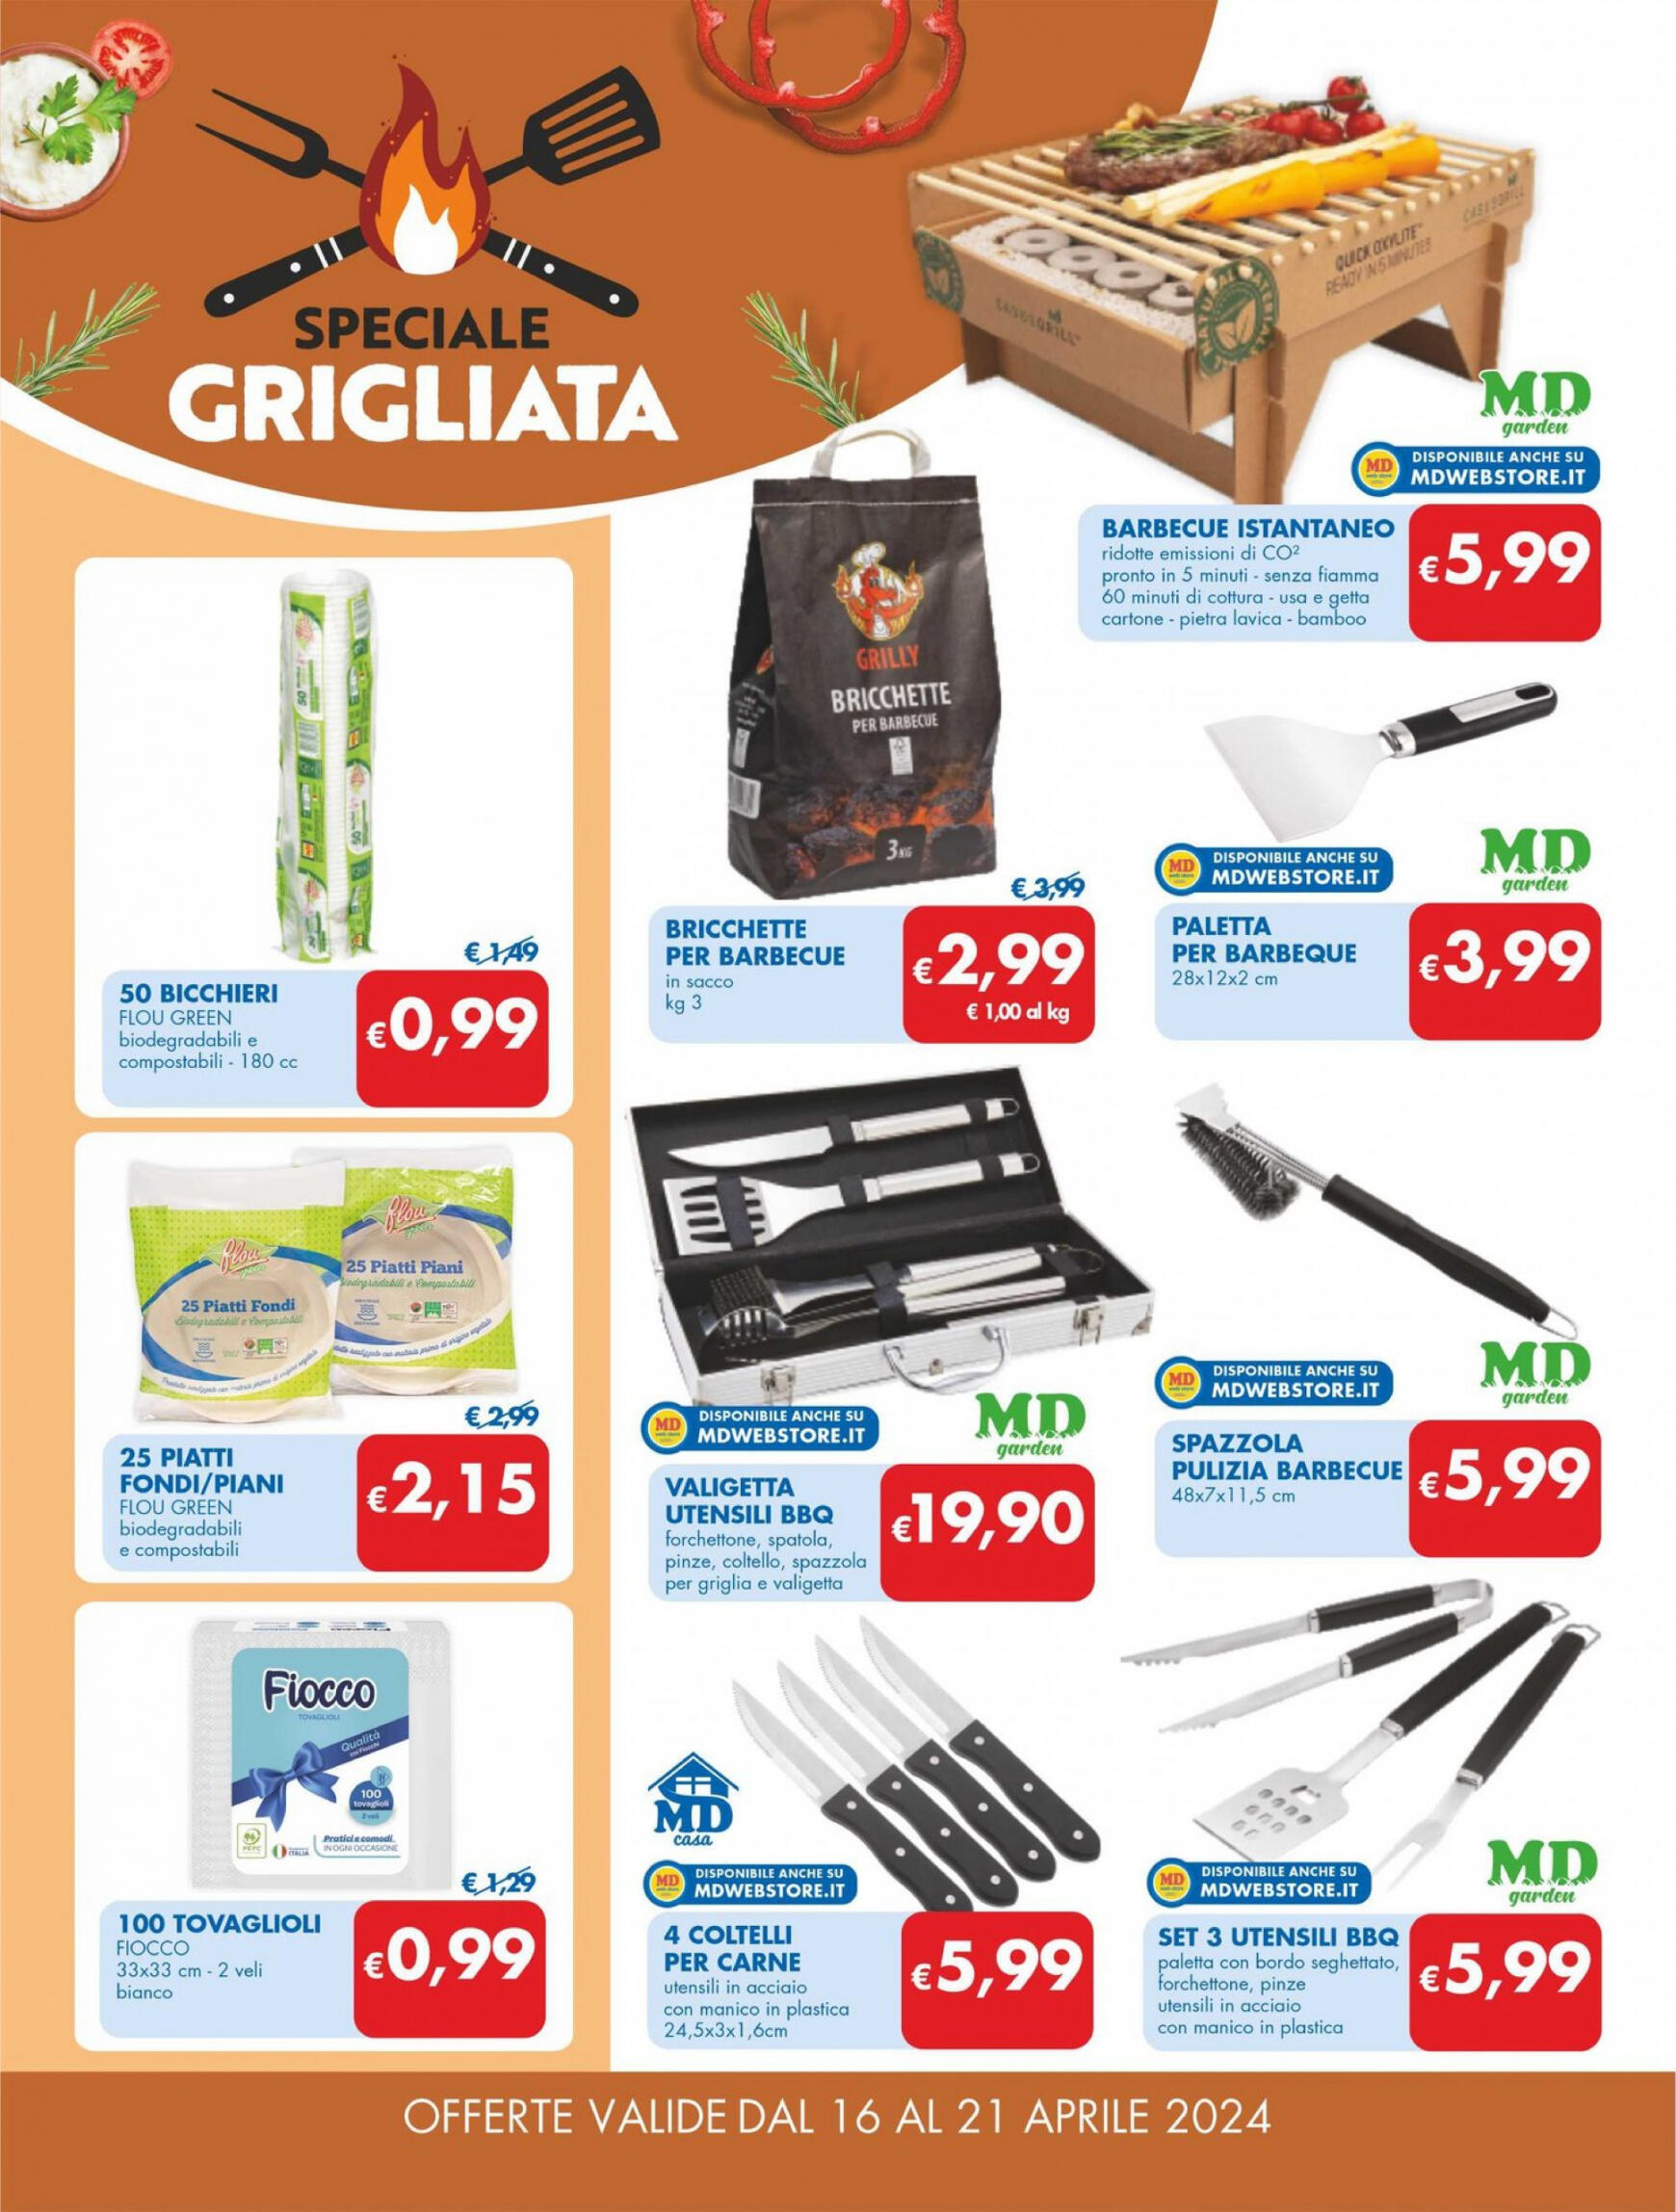 md-discount - Nuovo volantino MD 16.04. - 21.04. - page: 6